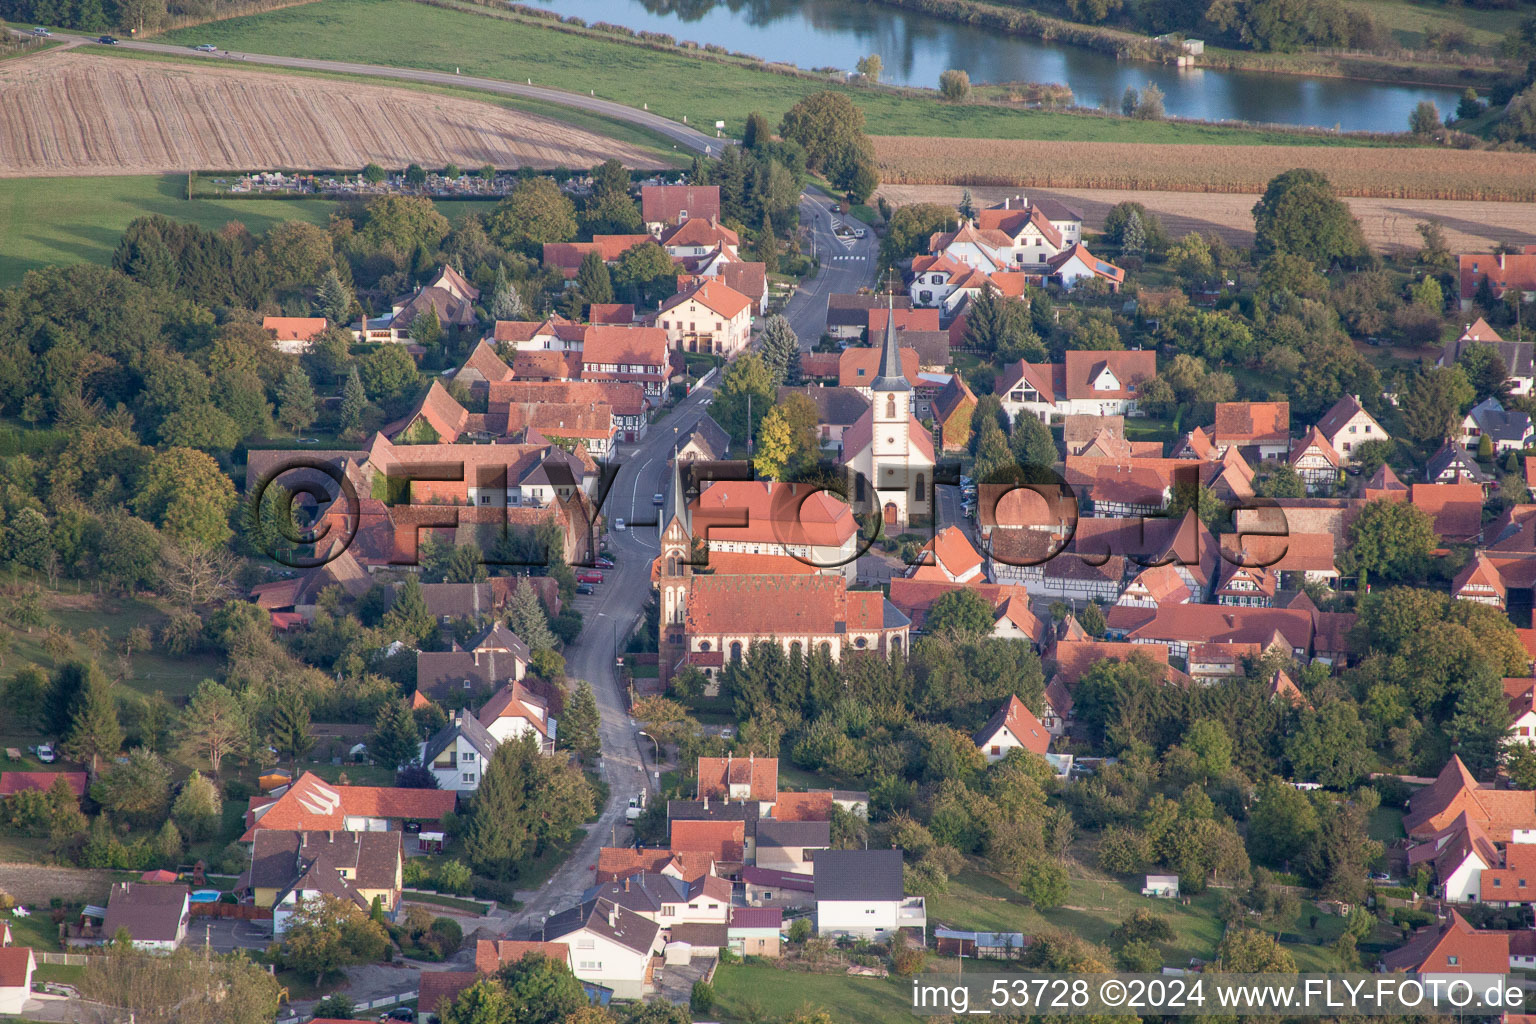 Aerial view of Church building in the village of in Kutzenhausen in Grand Est, France